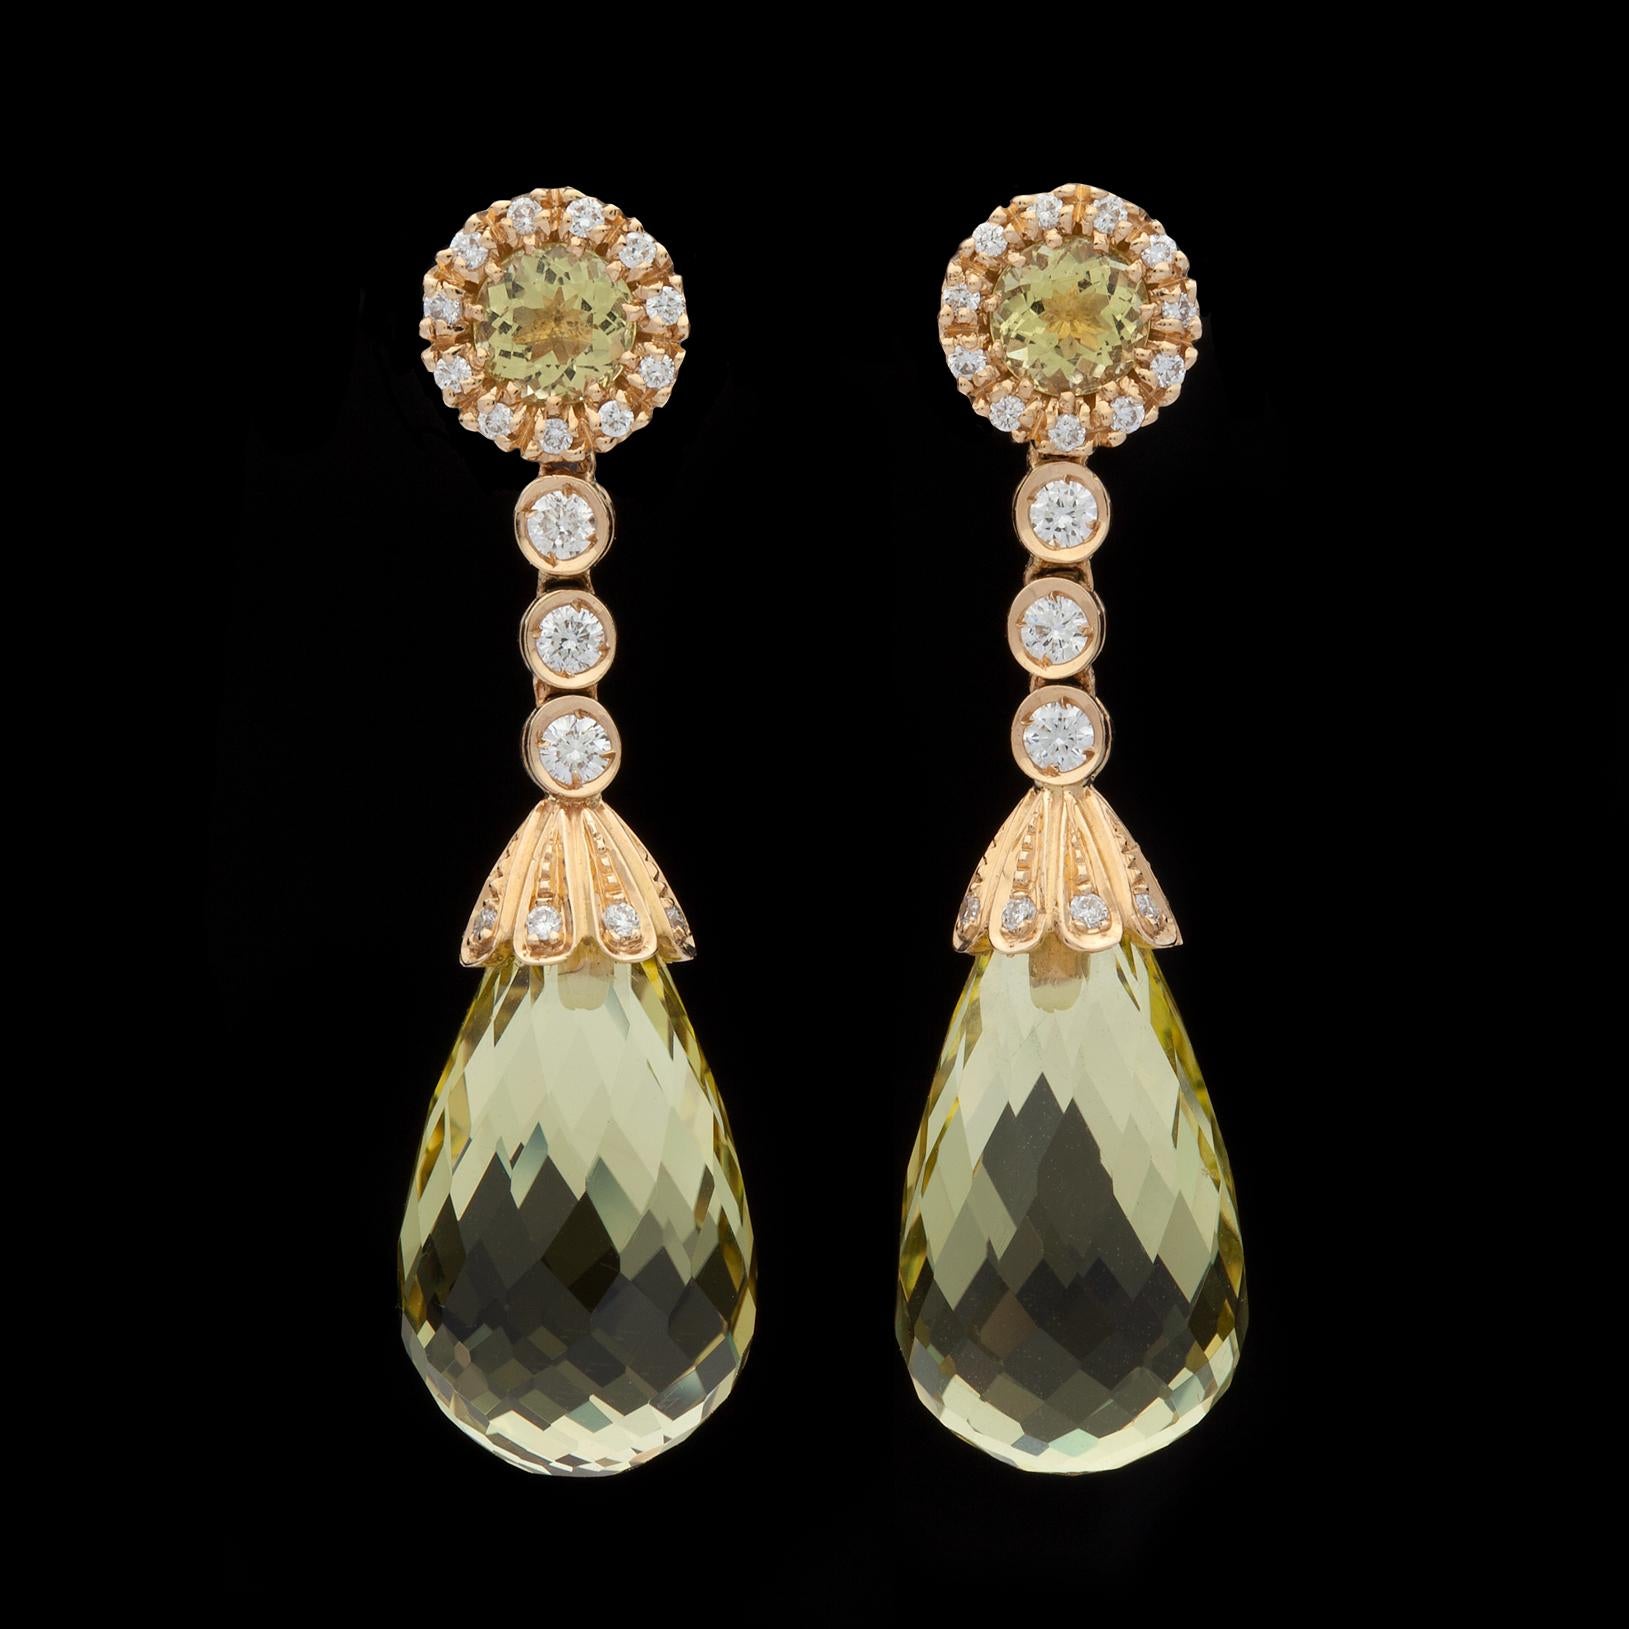 Favero quartz & diamond earrings, set in 18k yellow gold and featuring 4 mixed cut quartz weighing approximately 23.15 ct. tw. accented by approximately 0.59 ct. tw. of round brilliant cut diamonds. The earrings weigh 9.18 grams, and measure 1 1/2